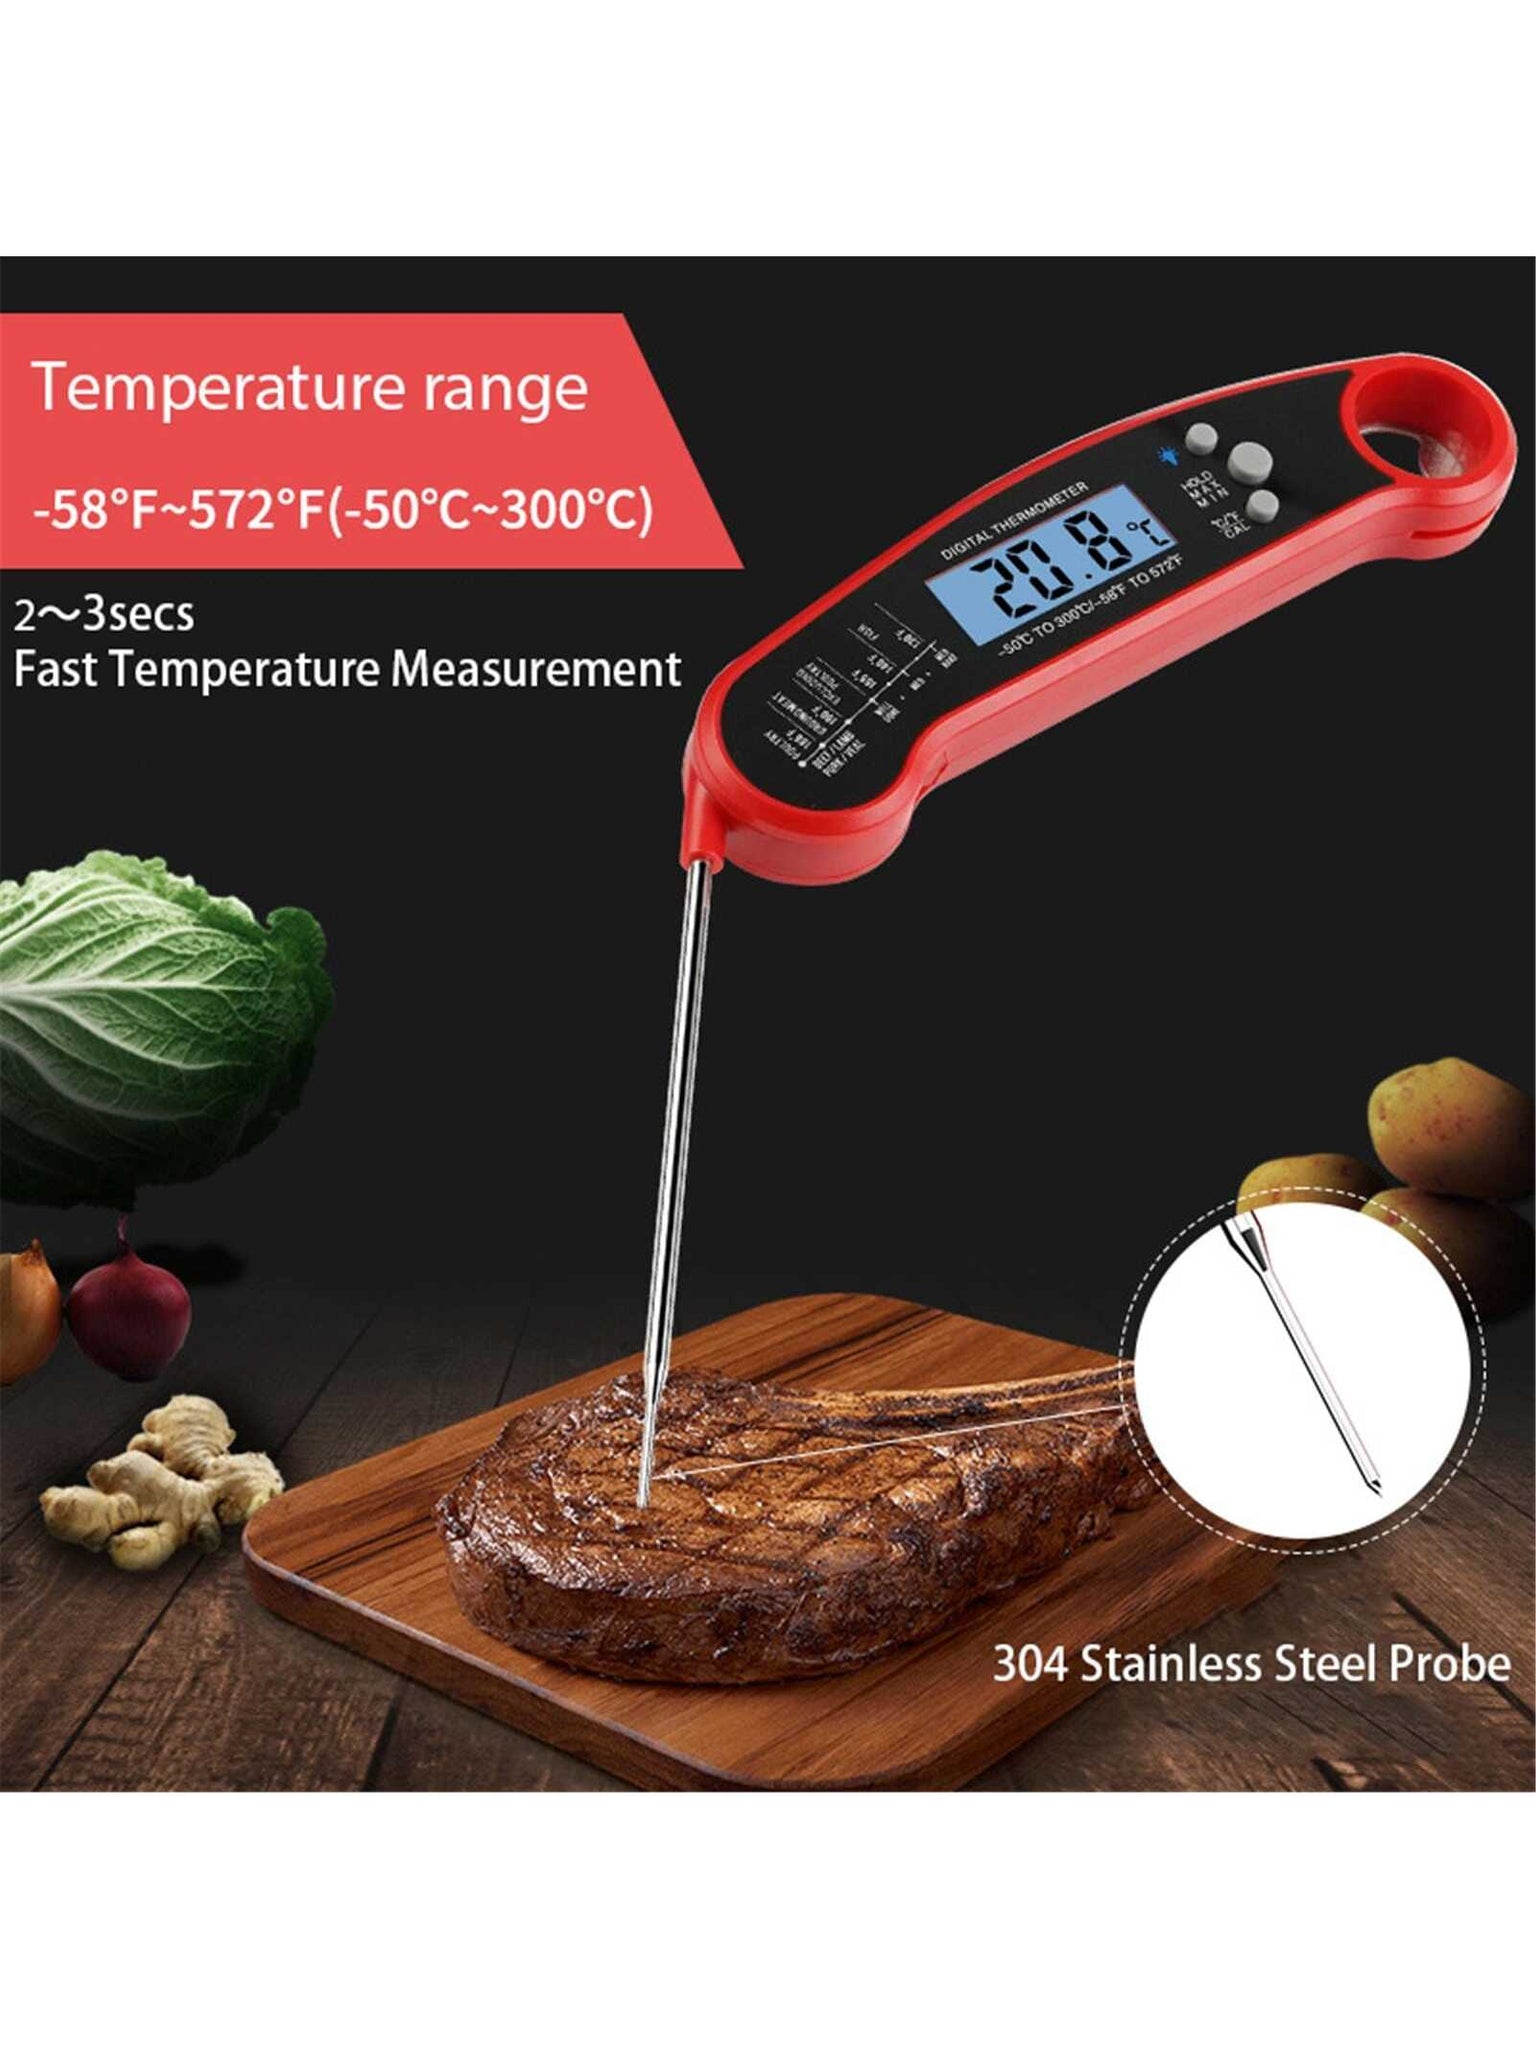 Meat Thermometer, Suitable For Barbecue And Cooking, Best Waterproof Ultra Fast, Instant Read With Backlight And Calibration, Digital Food Probe For Kitchen, Outdoor Bbq And Grilling-Reddish black-6